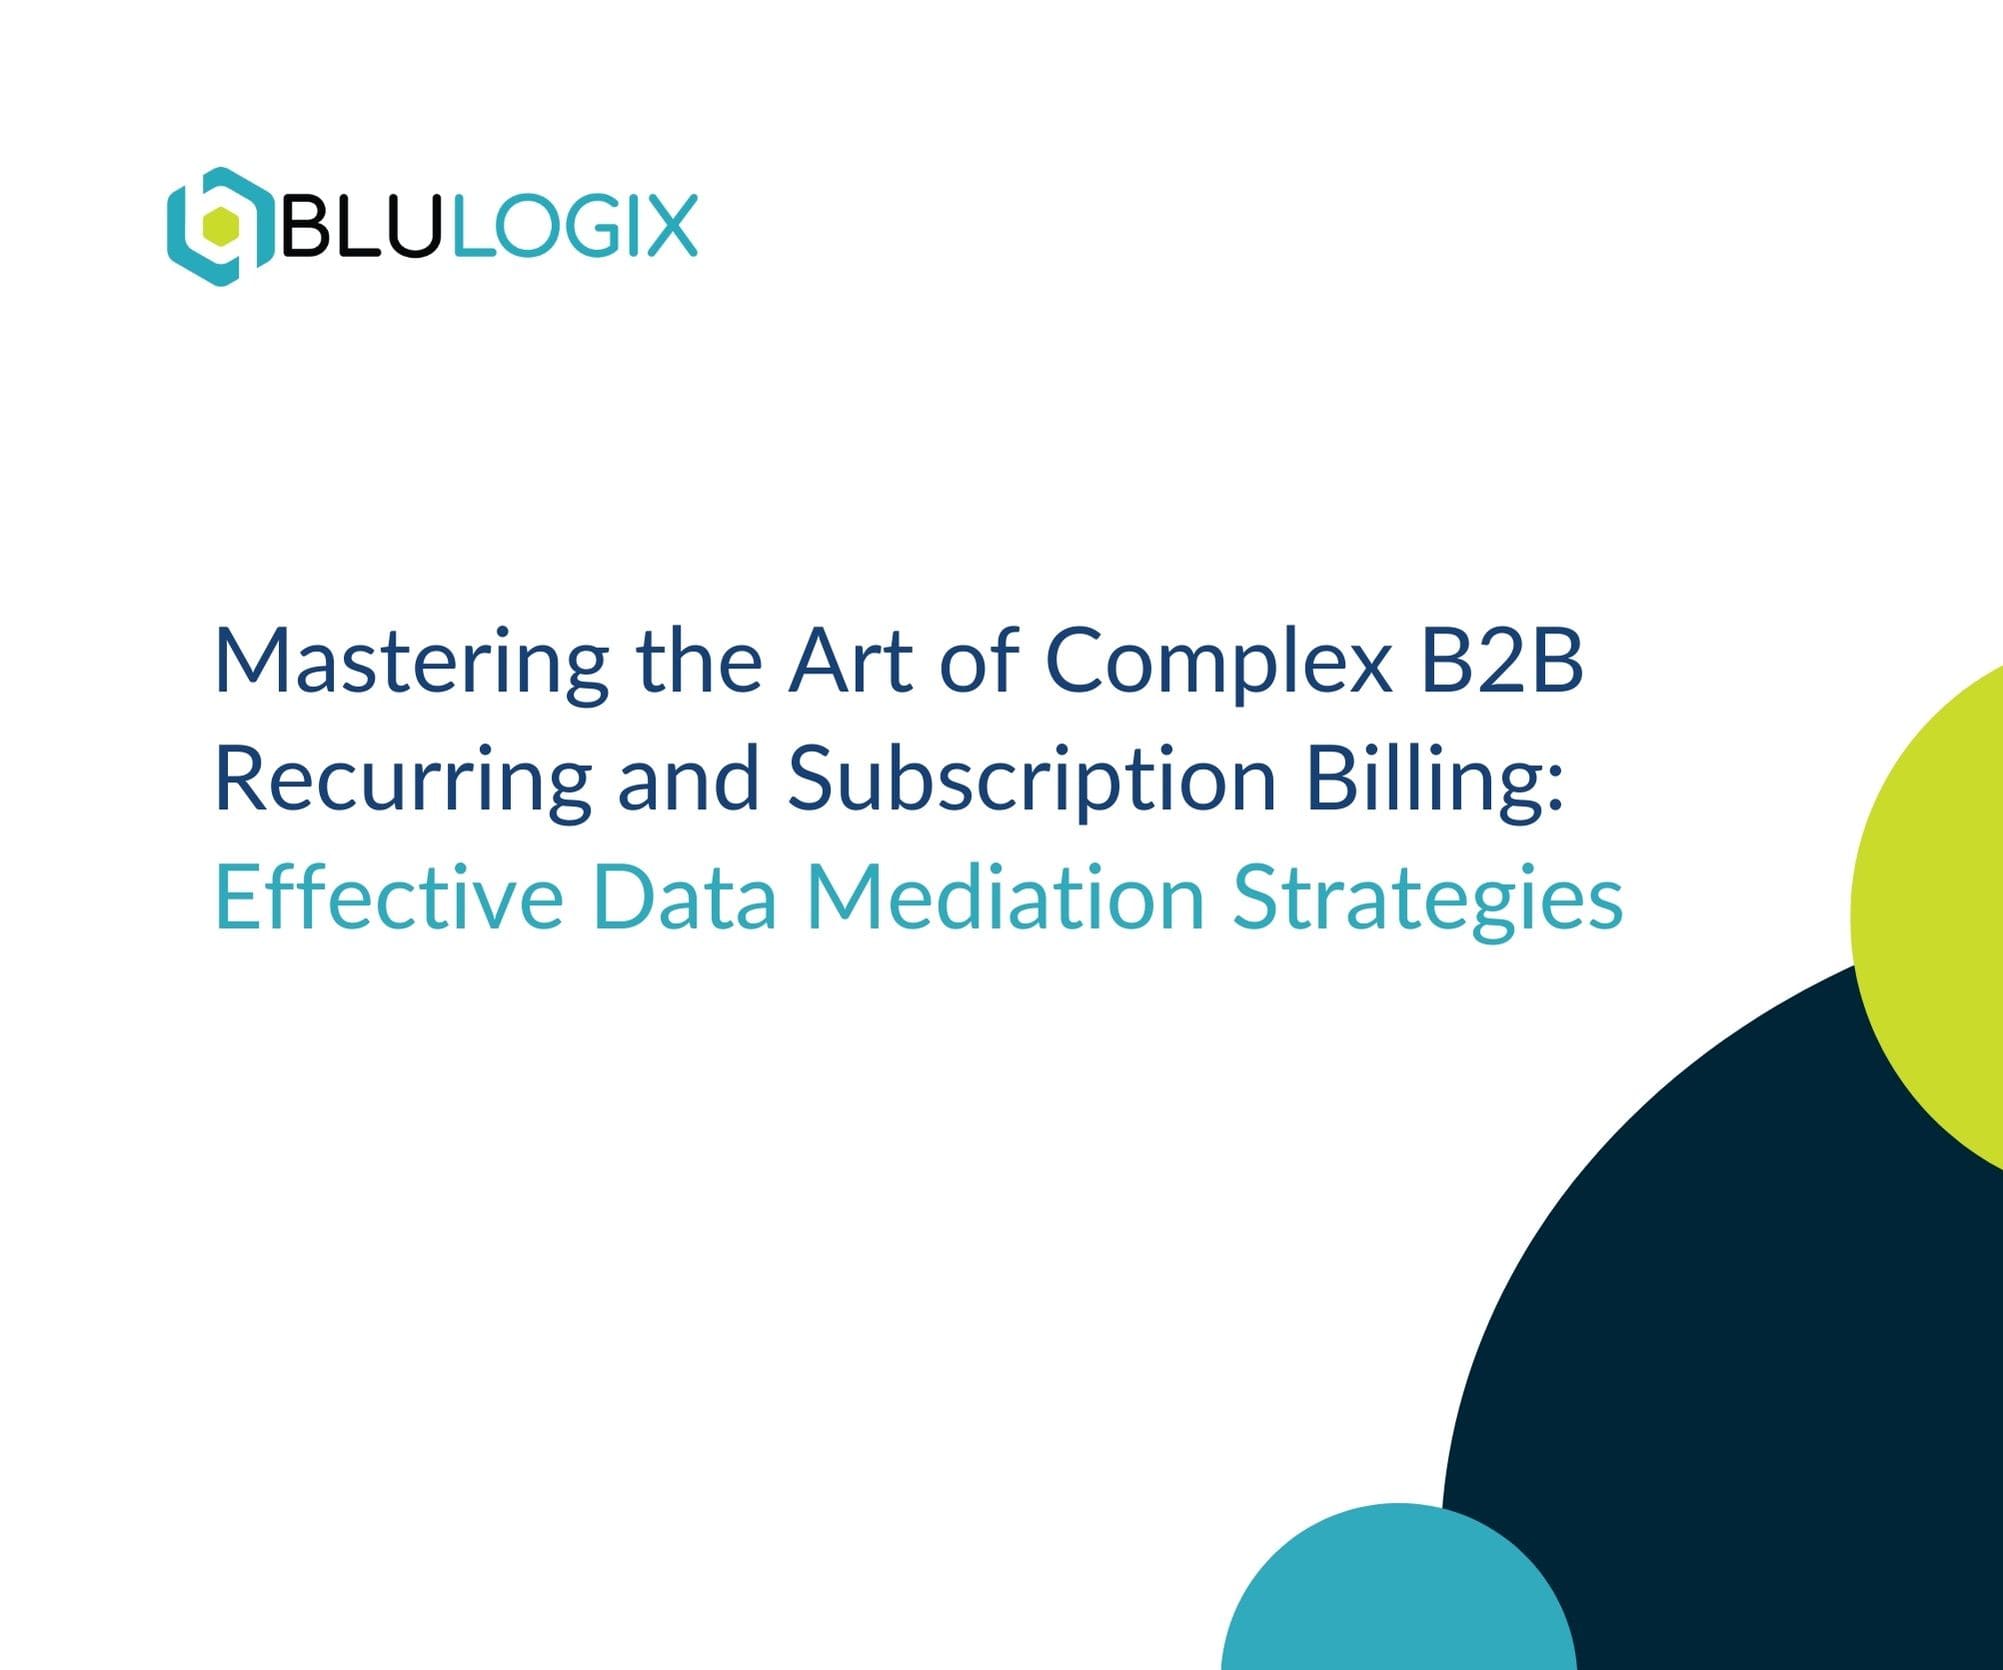 Mastering the Art of Complex B2B Recurring and Subscription Billing Effective Data Mediation Strategies